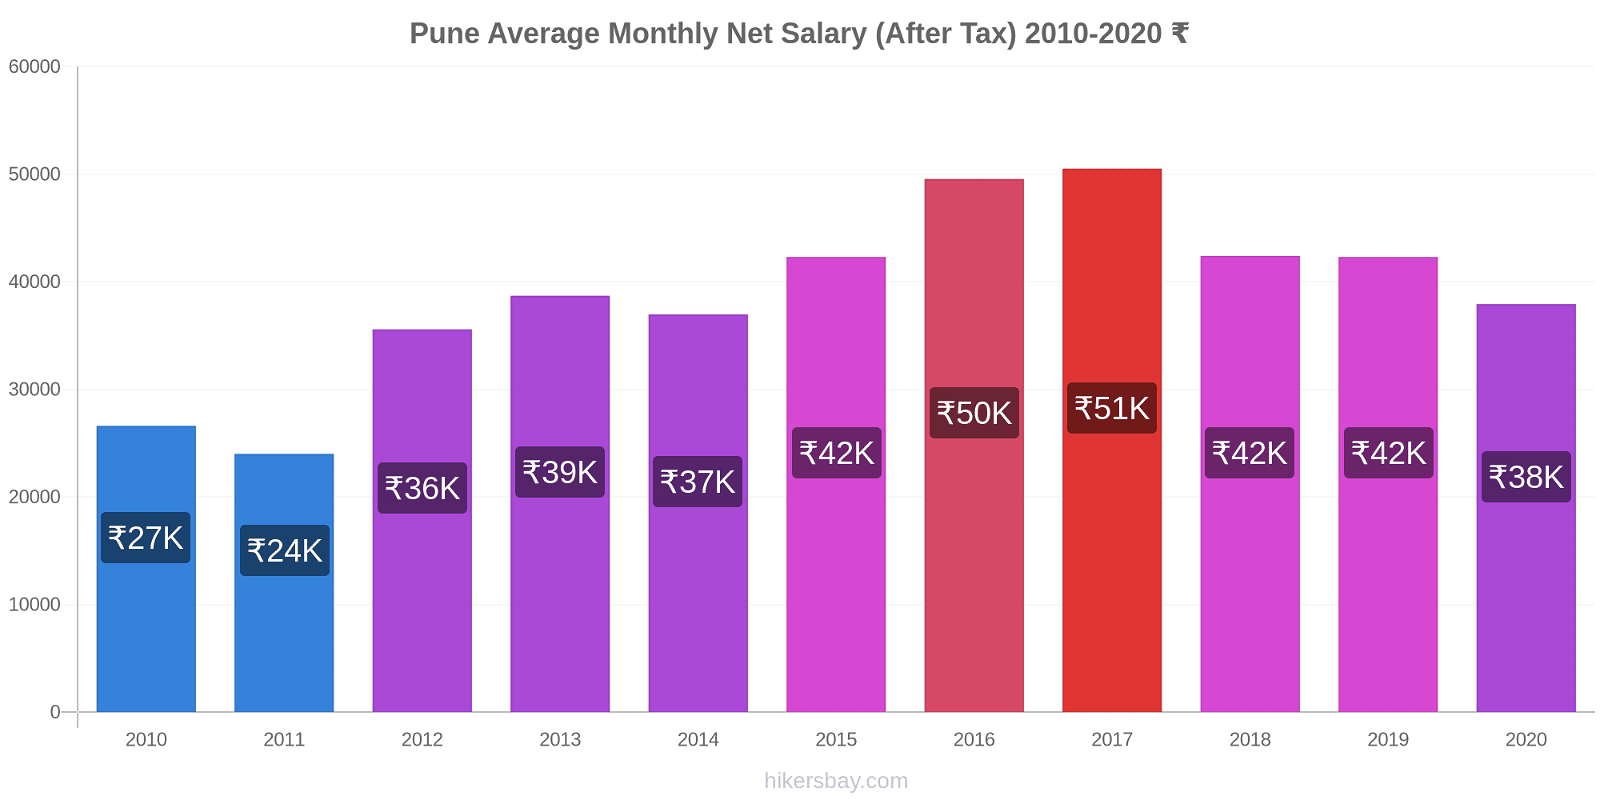 Pune price changes Average Monthly Net Salary (After Tax) hikersbay.com